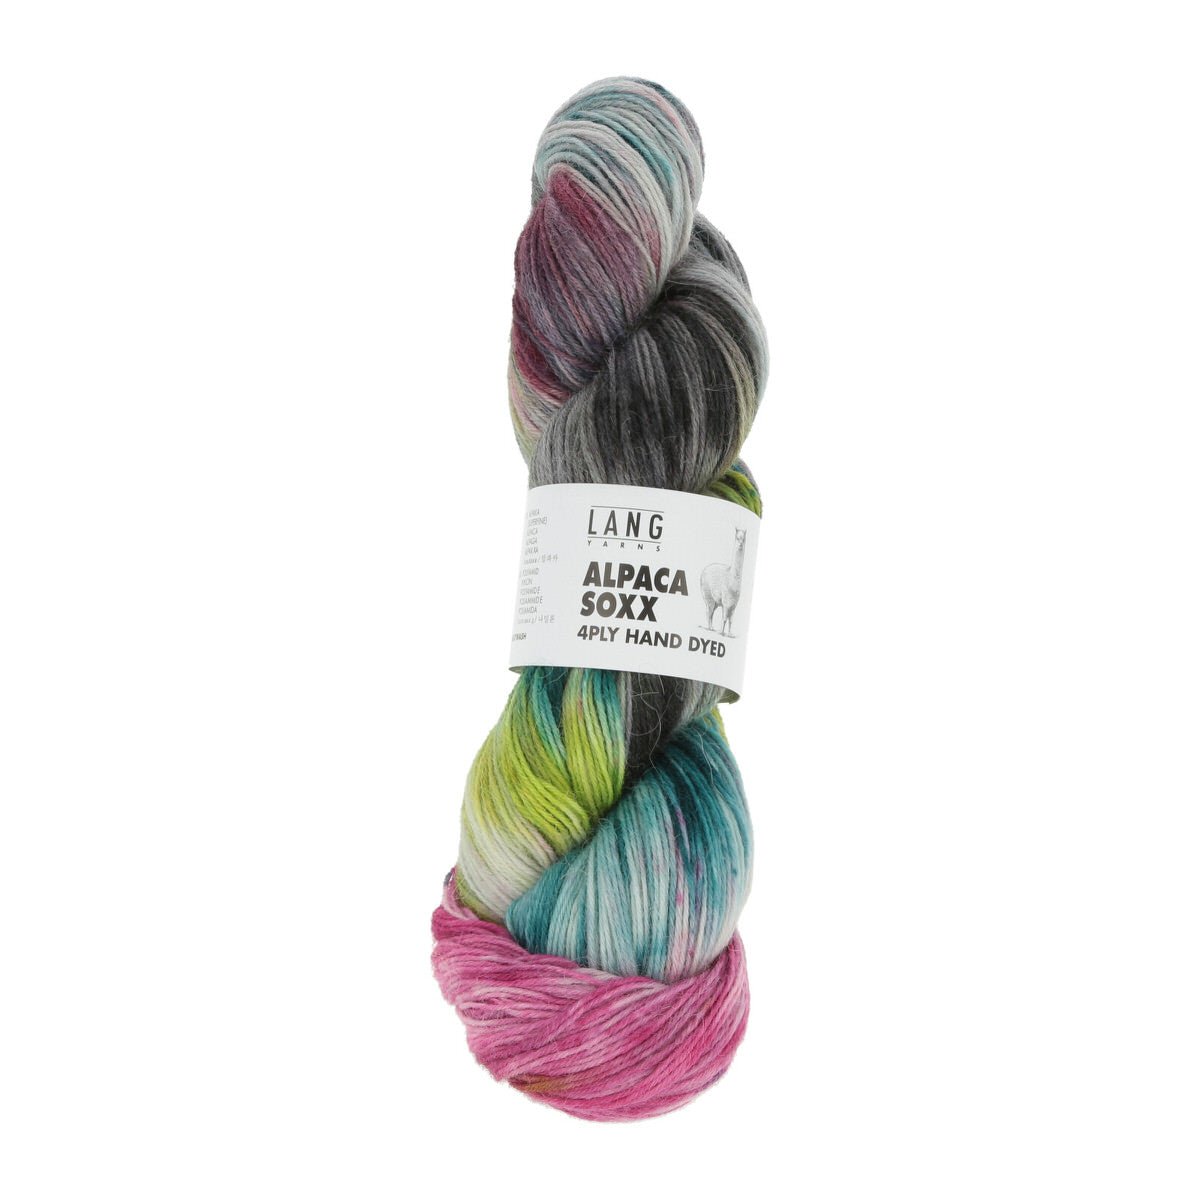 ALPACA SOXX 4-FACH/4-PLY HAND DYED 1132.0005 - Lang